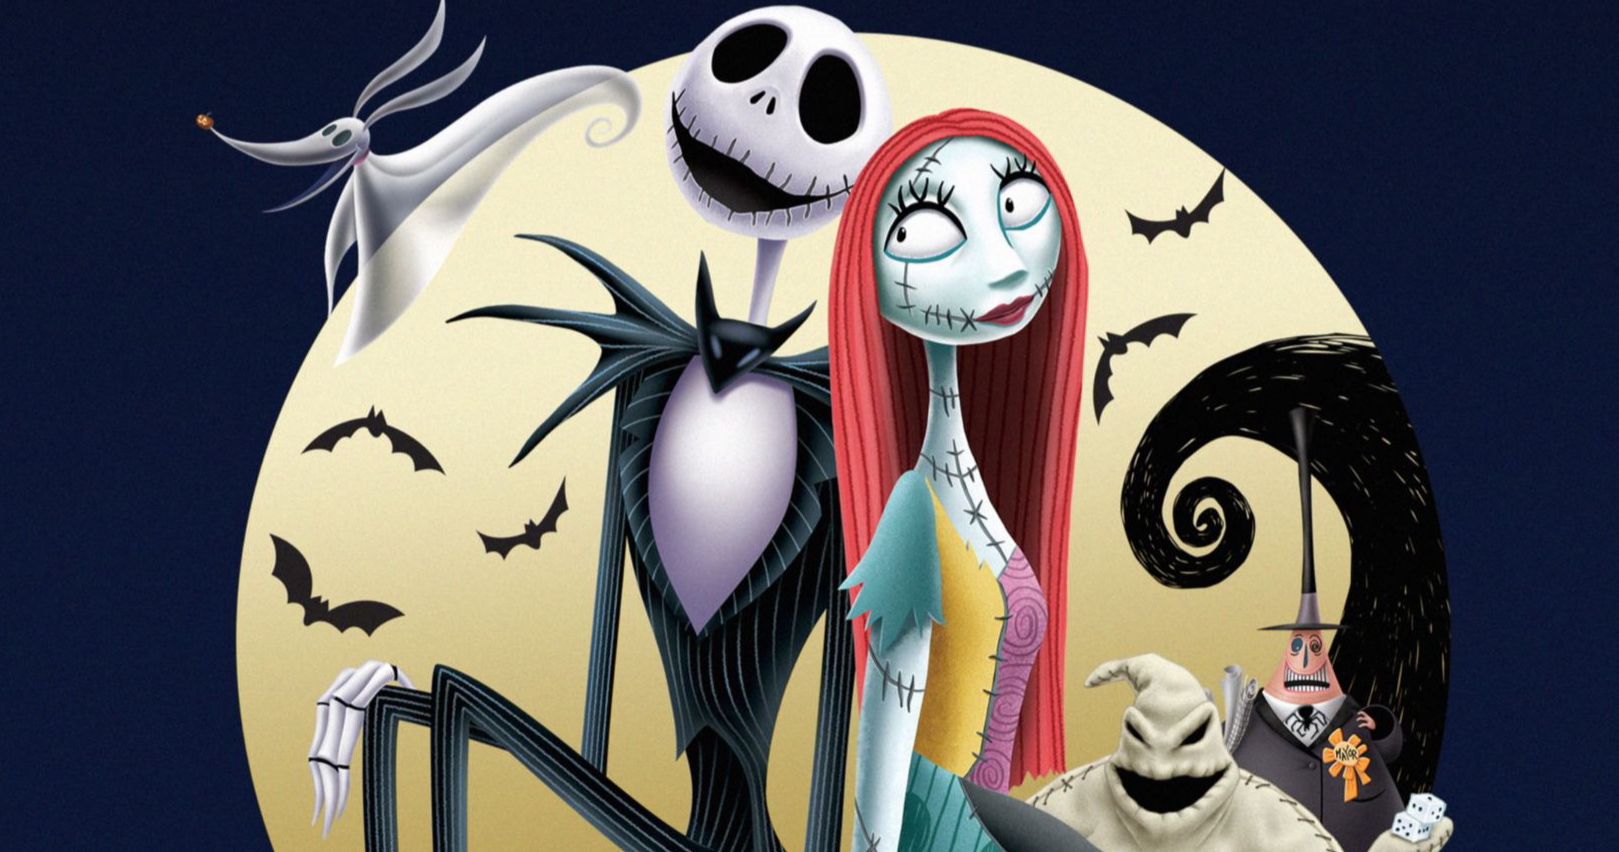 Sally's Nail Color in the Movie "The Nightmare Before Christmas" - wide 6